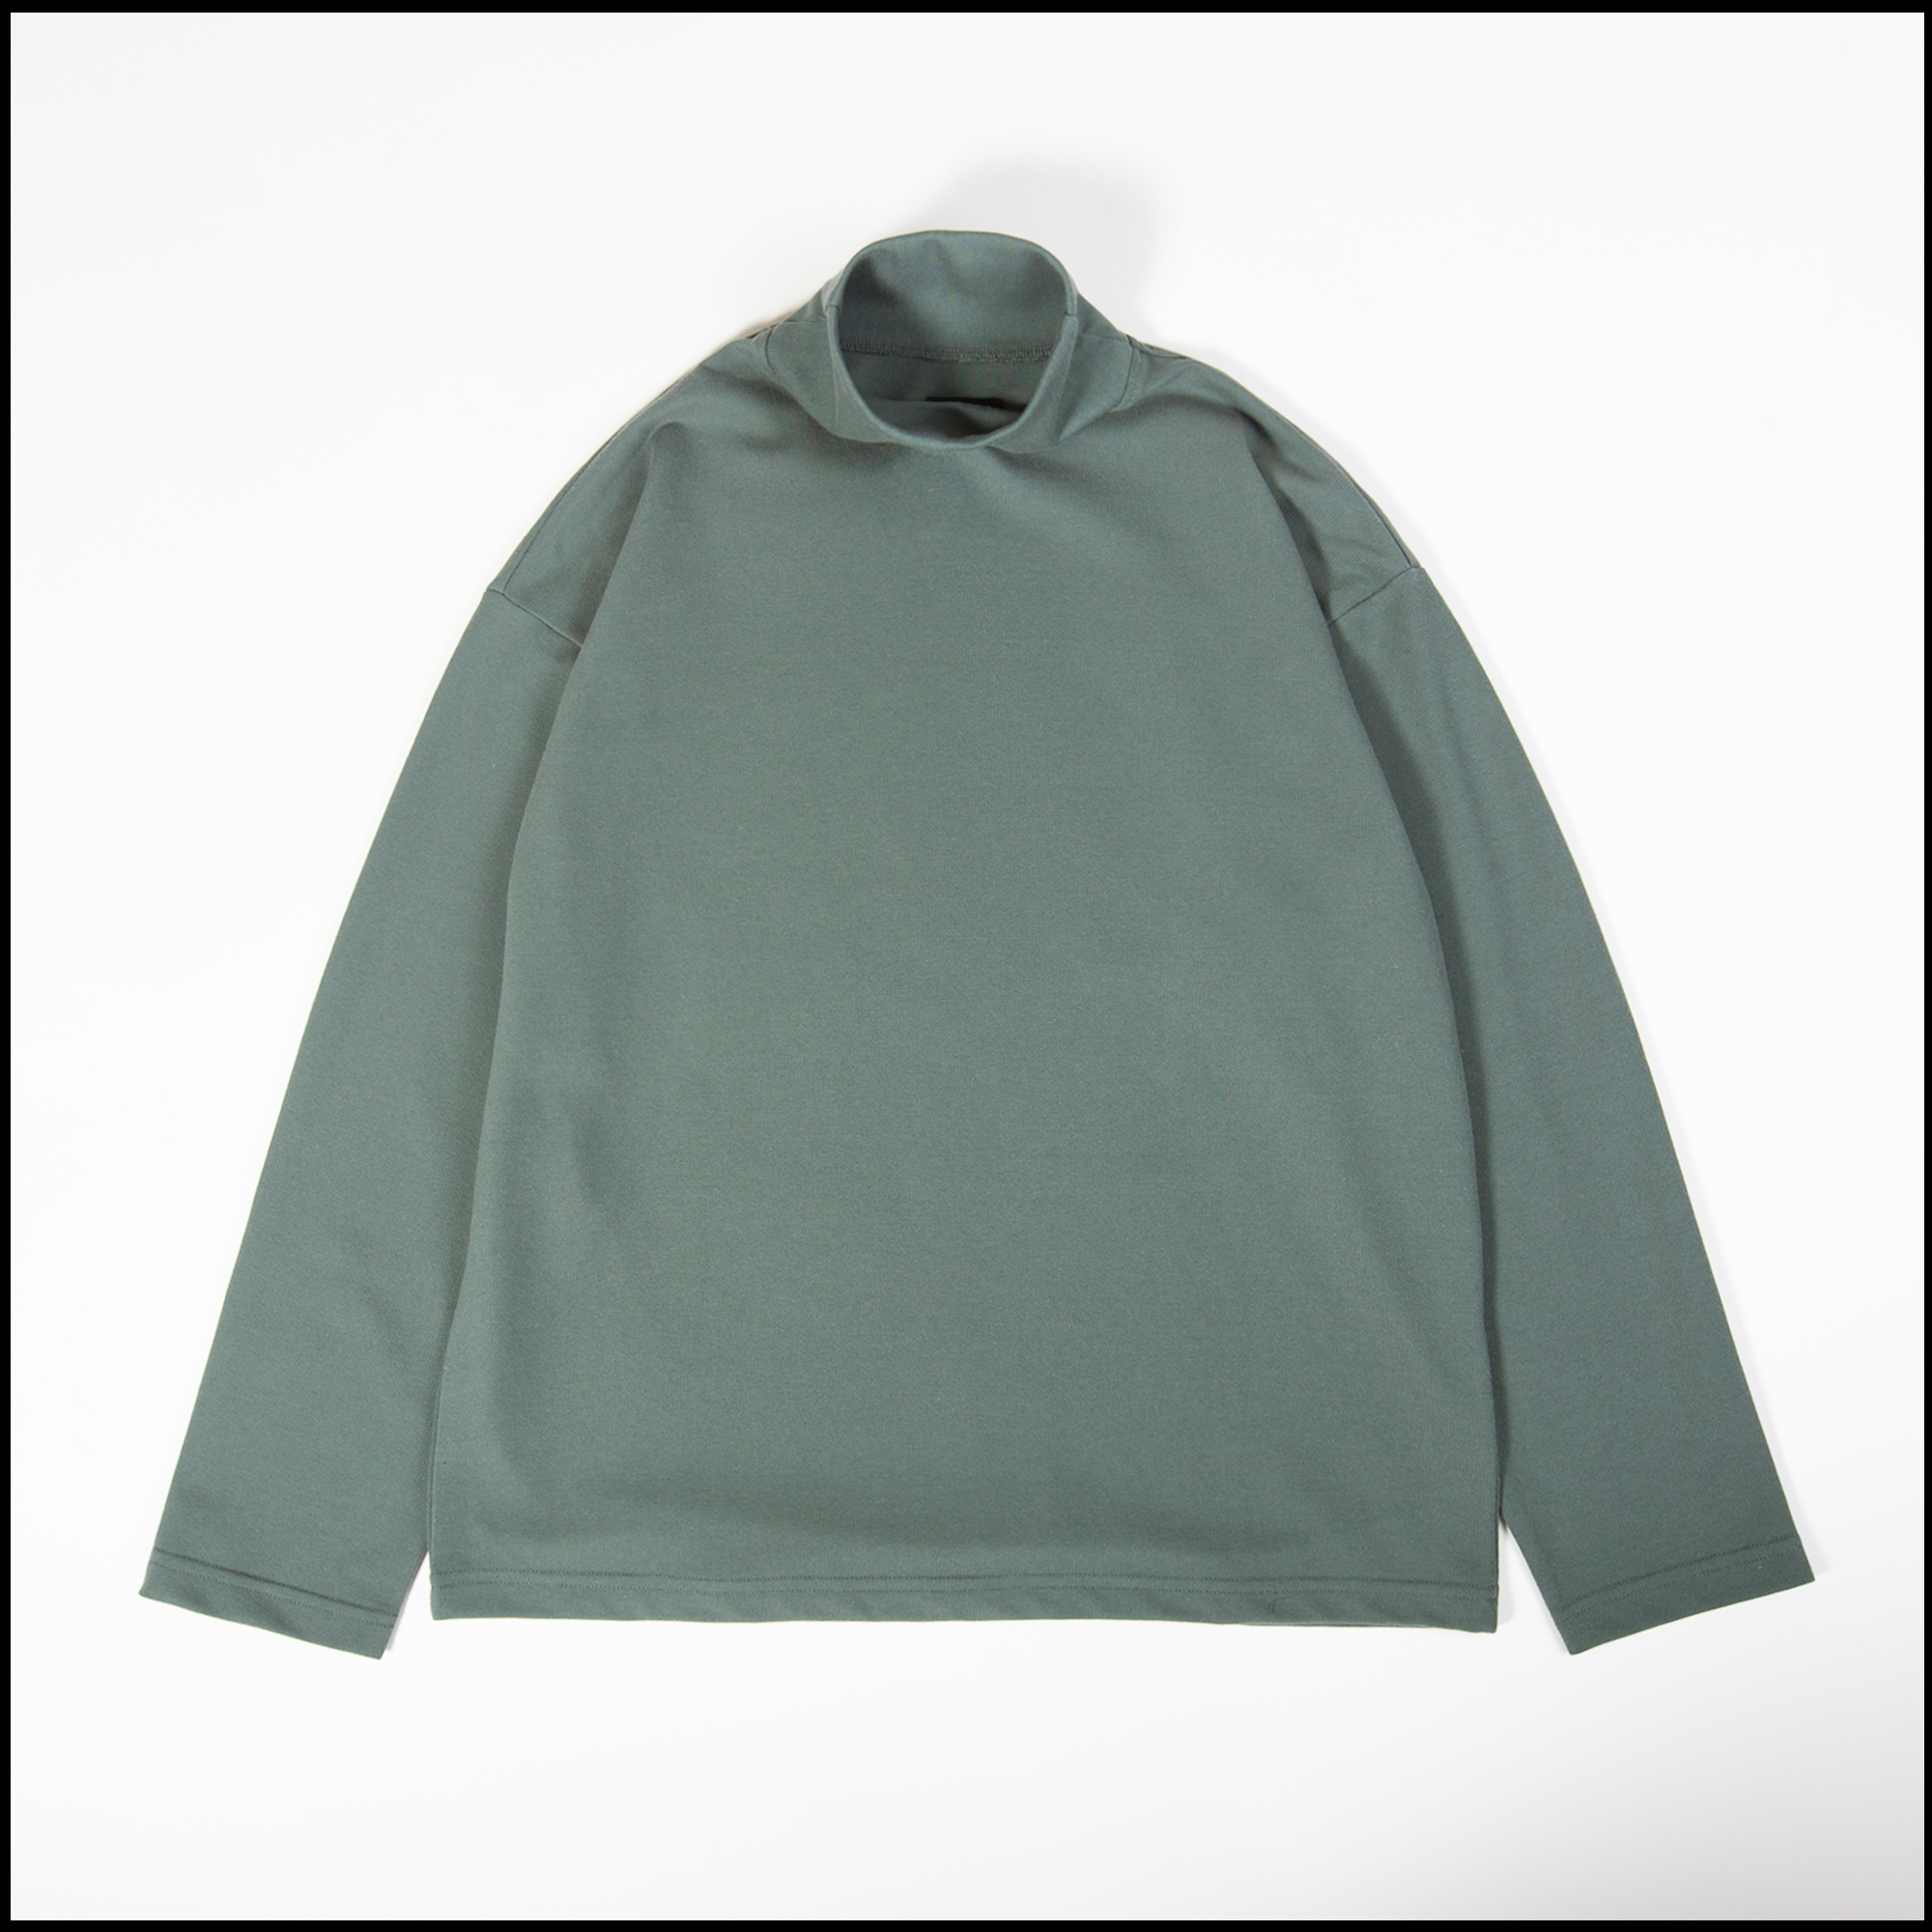 ORLO t-shirt in Emerald color by Arpenteur